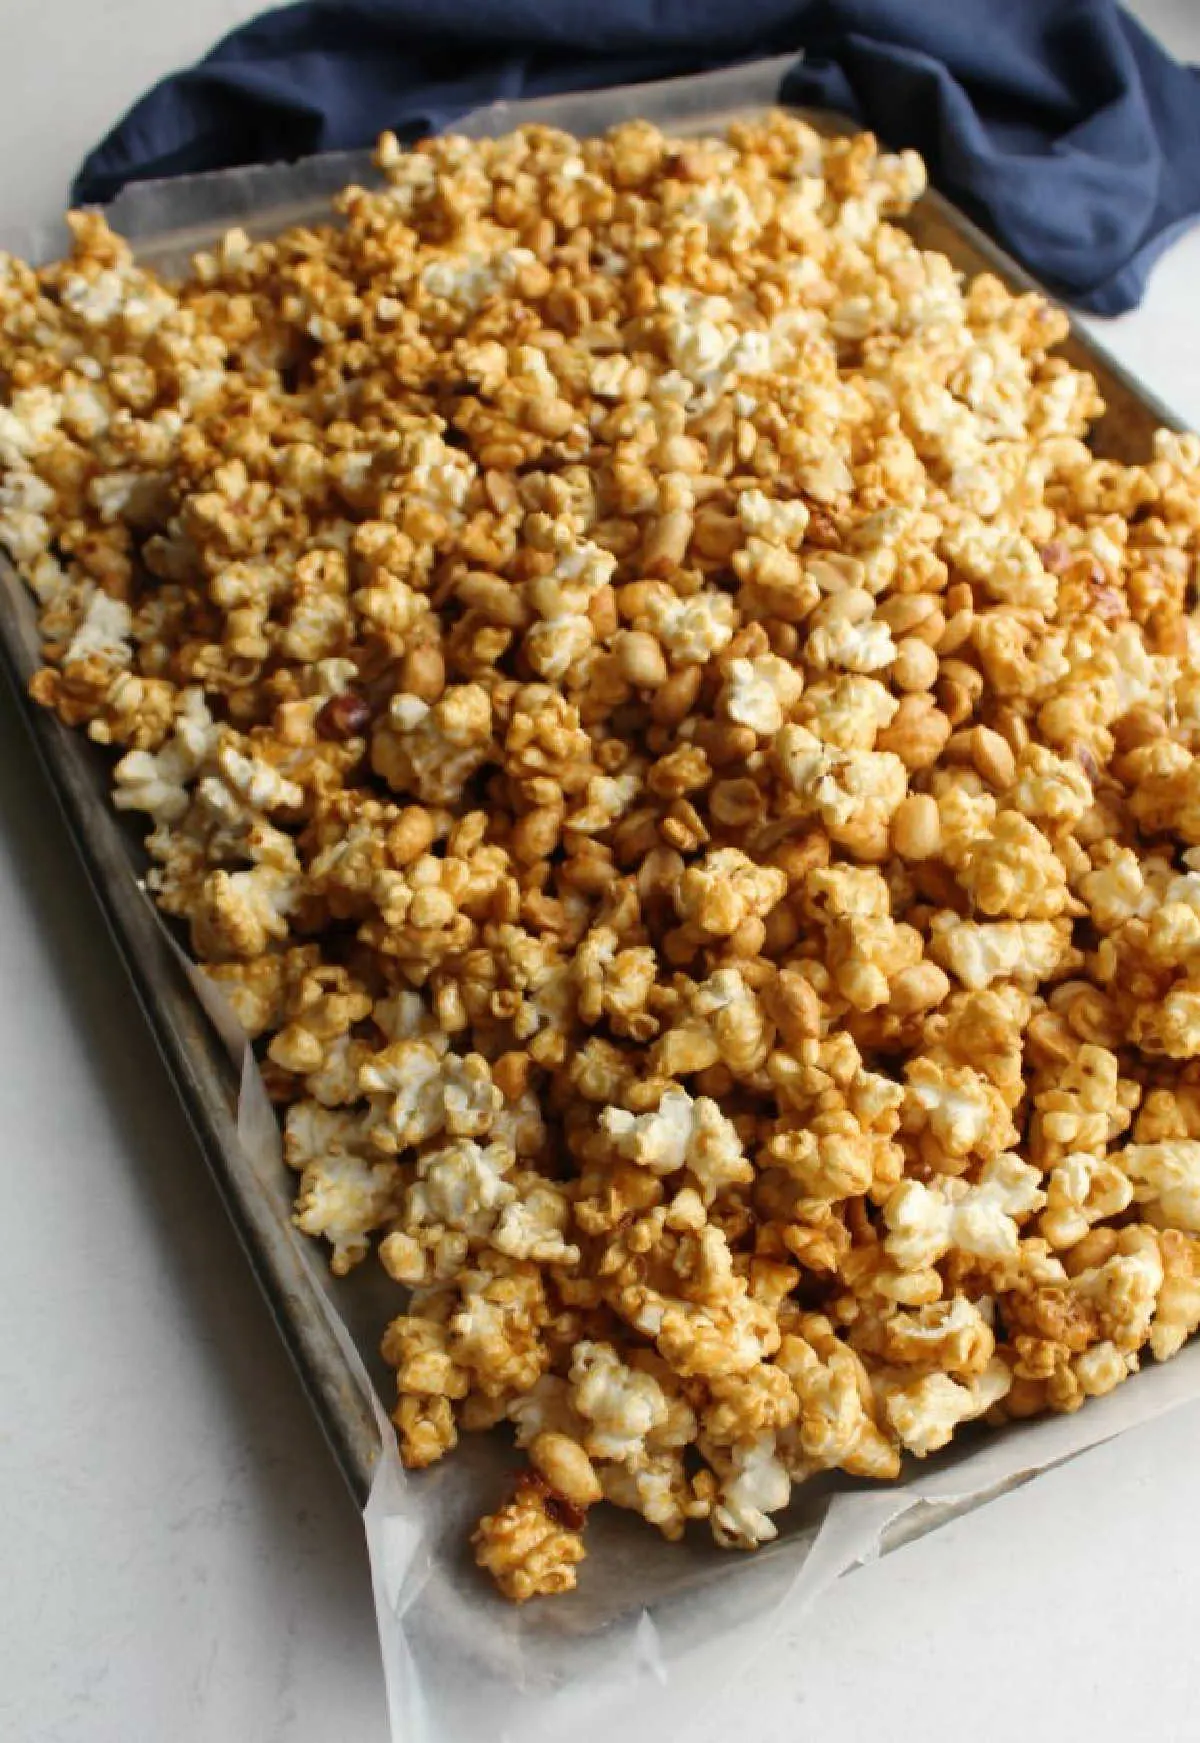 wax paper lined pan filled with cooling caramel corn.